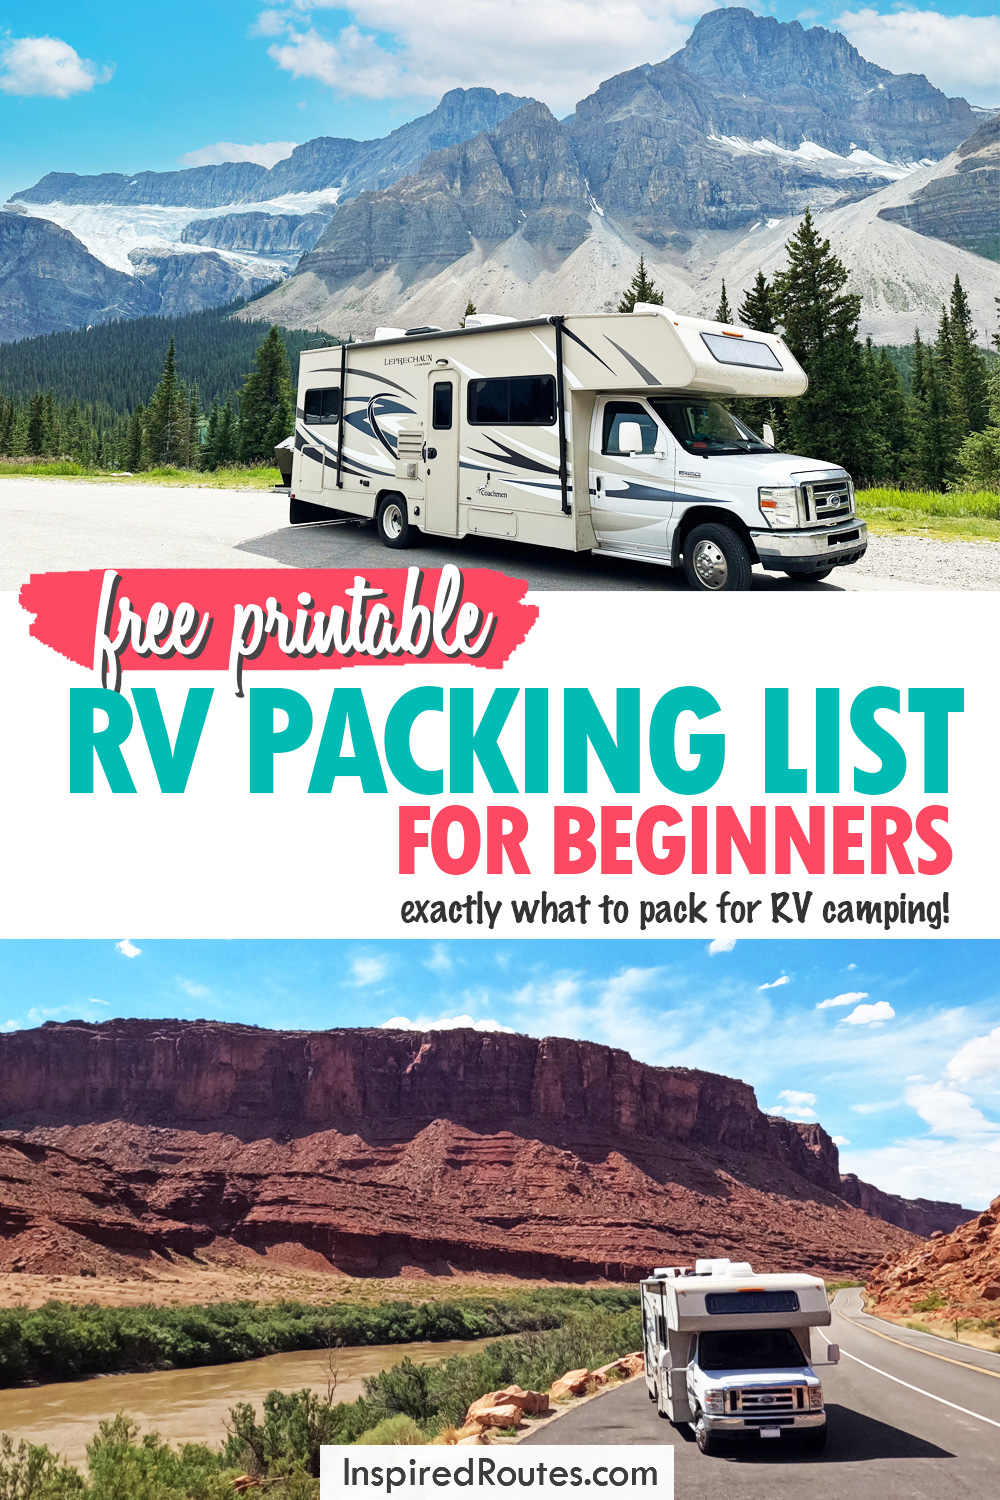 two images of RVs with mountains and text that reads free printable RV packing list for beginners exactly what to pack for RV camping